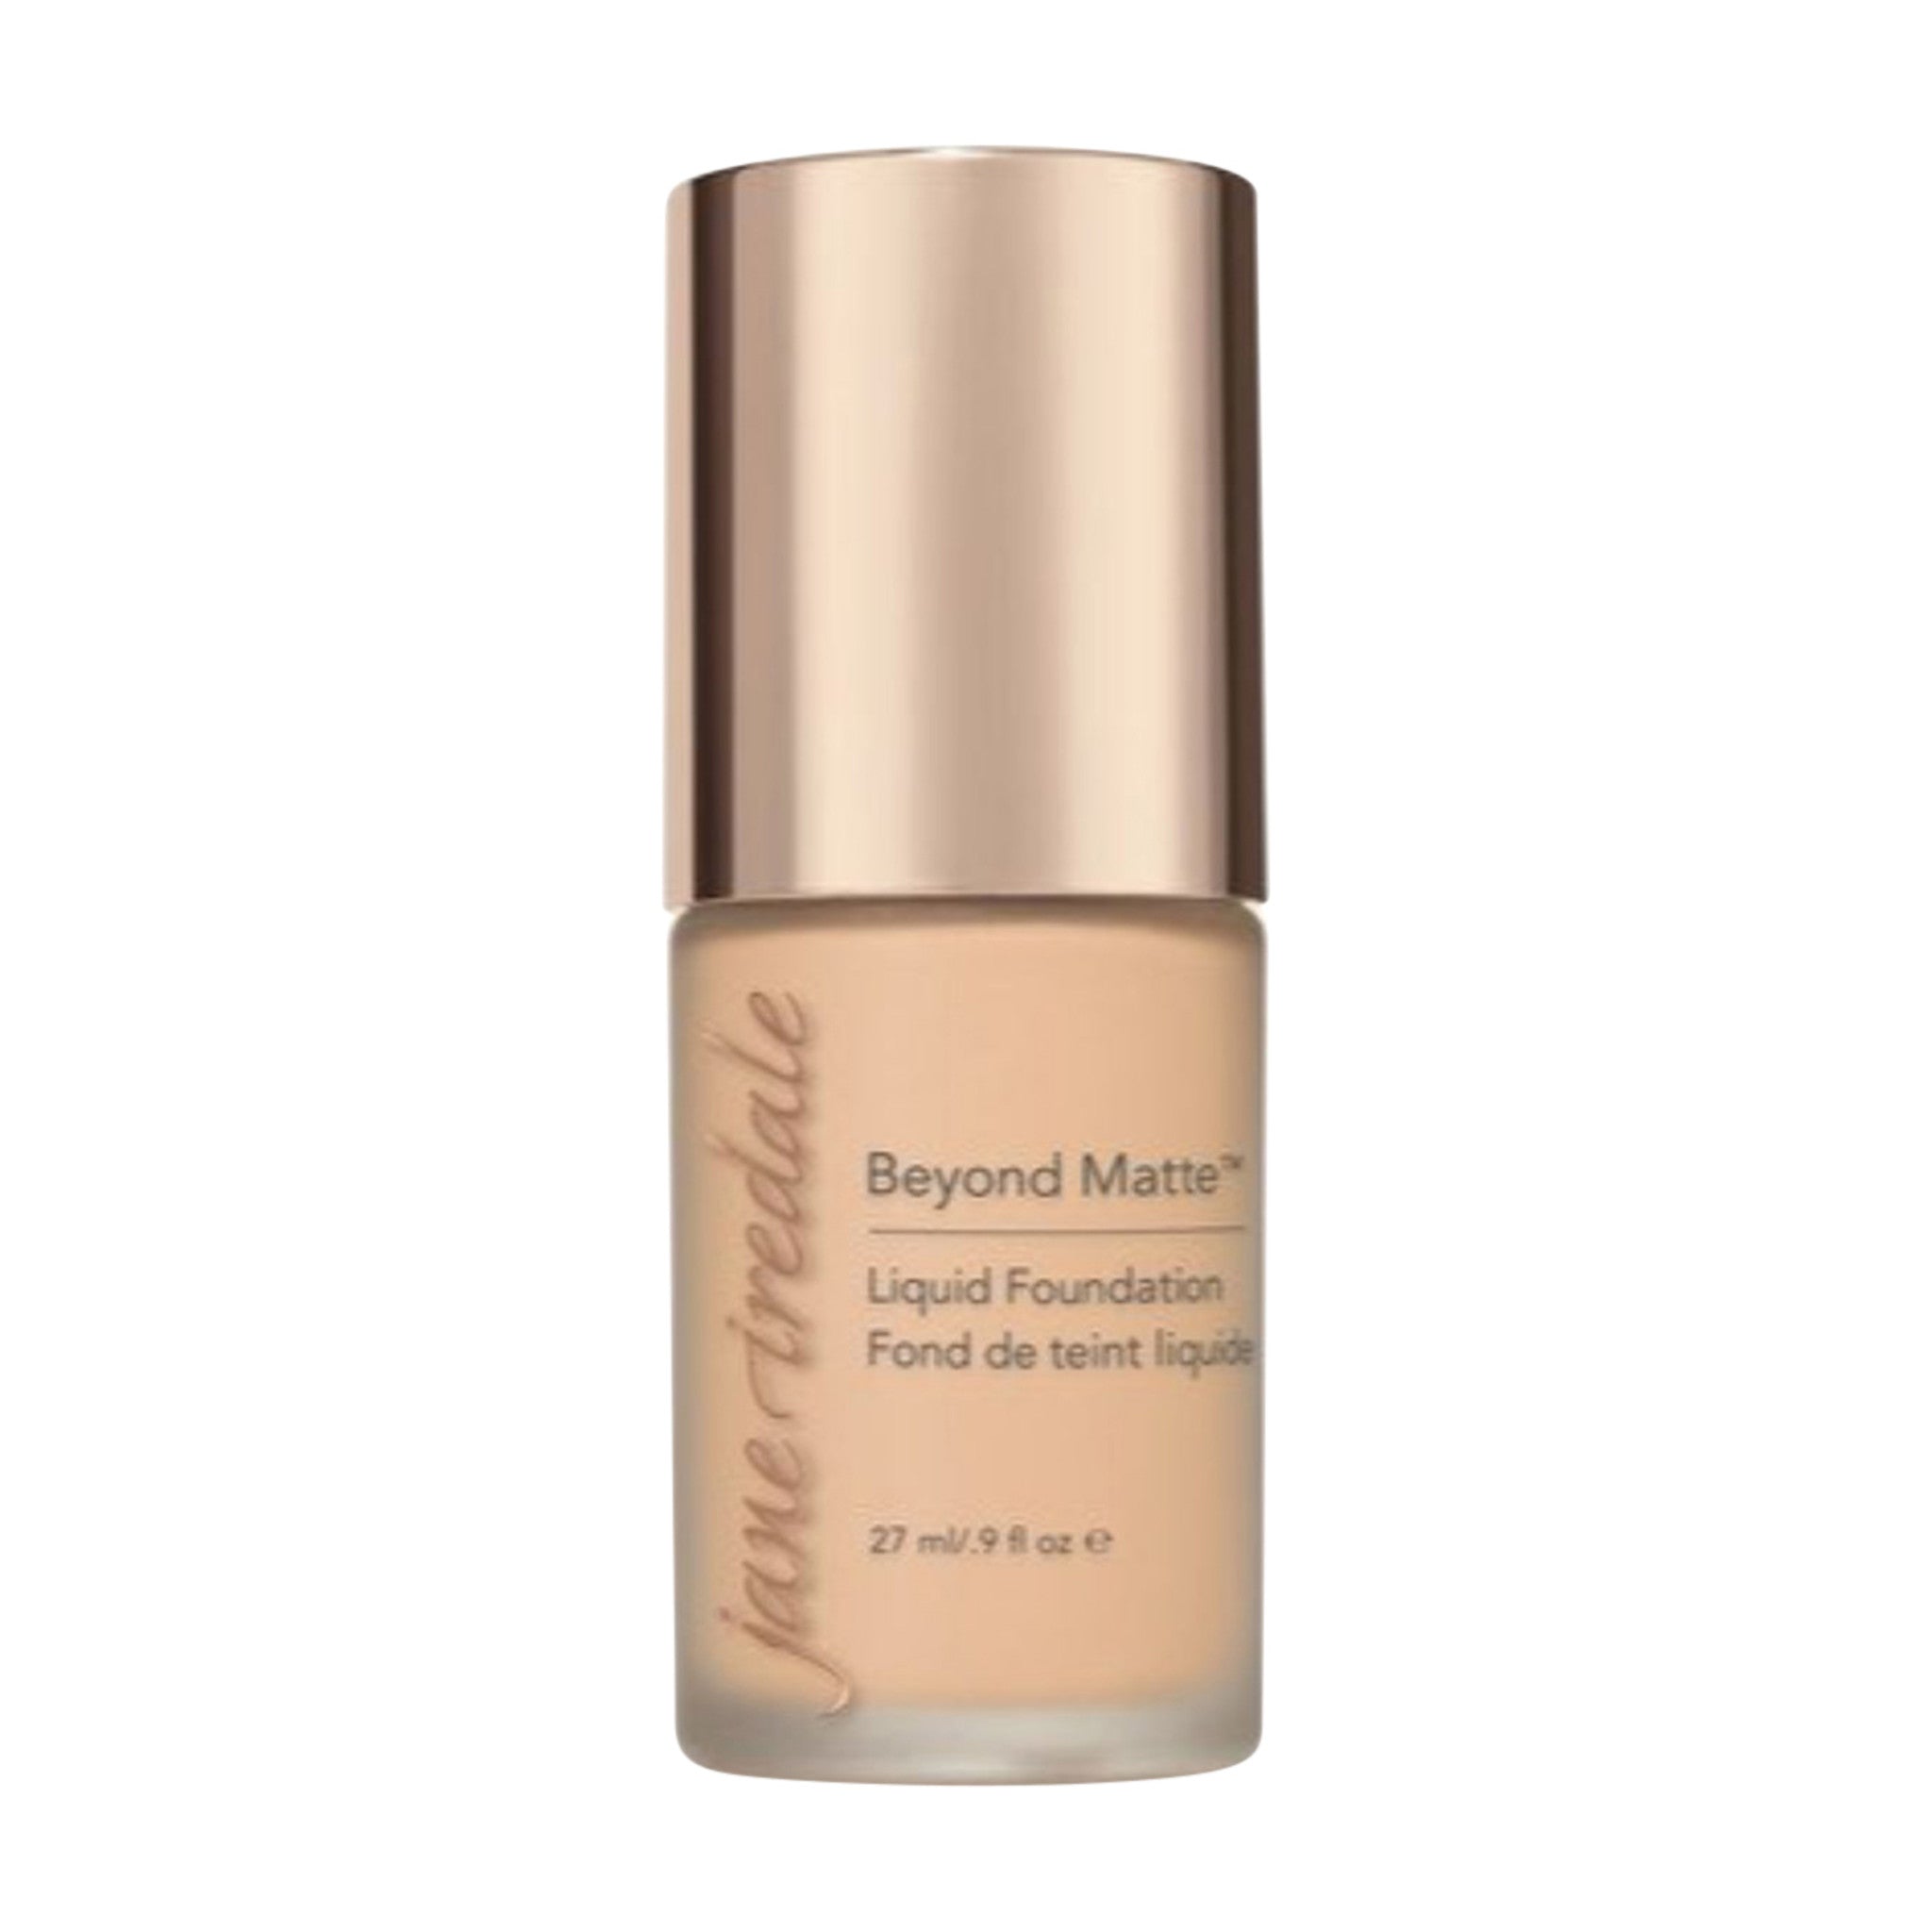 Jane Iredale Beyond Matte Liquid Foundation Color/Shade variant: M3 main image. This product is for light complexions